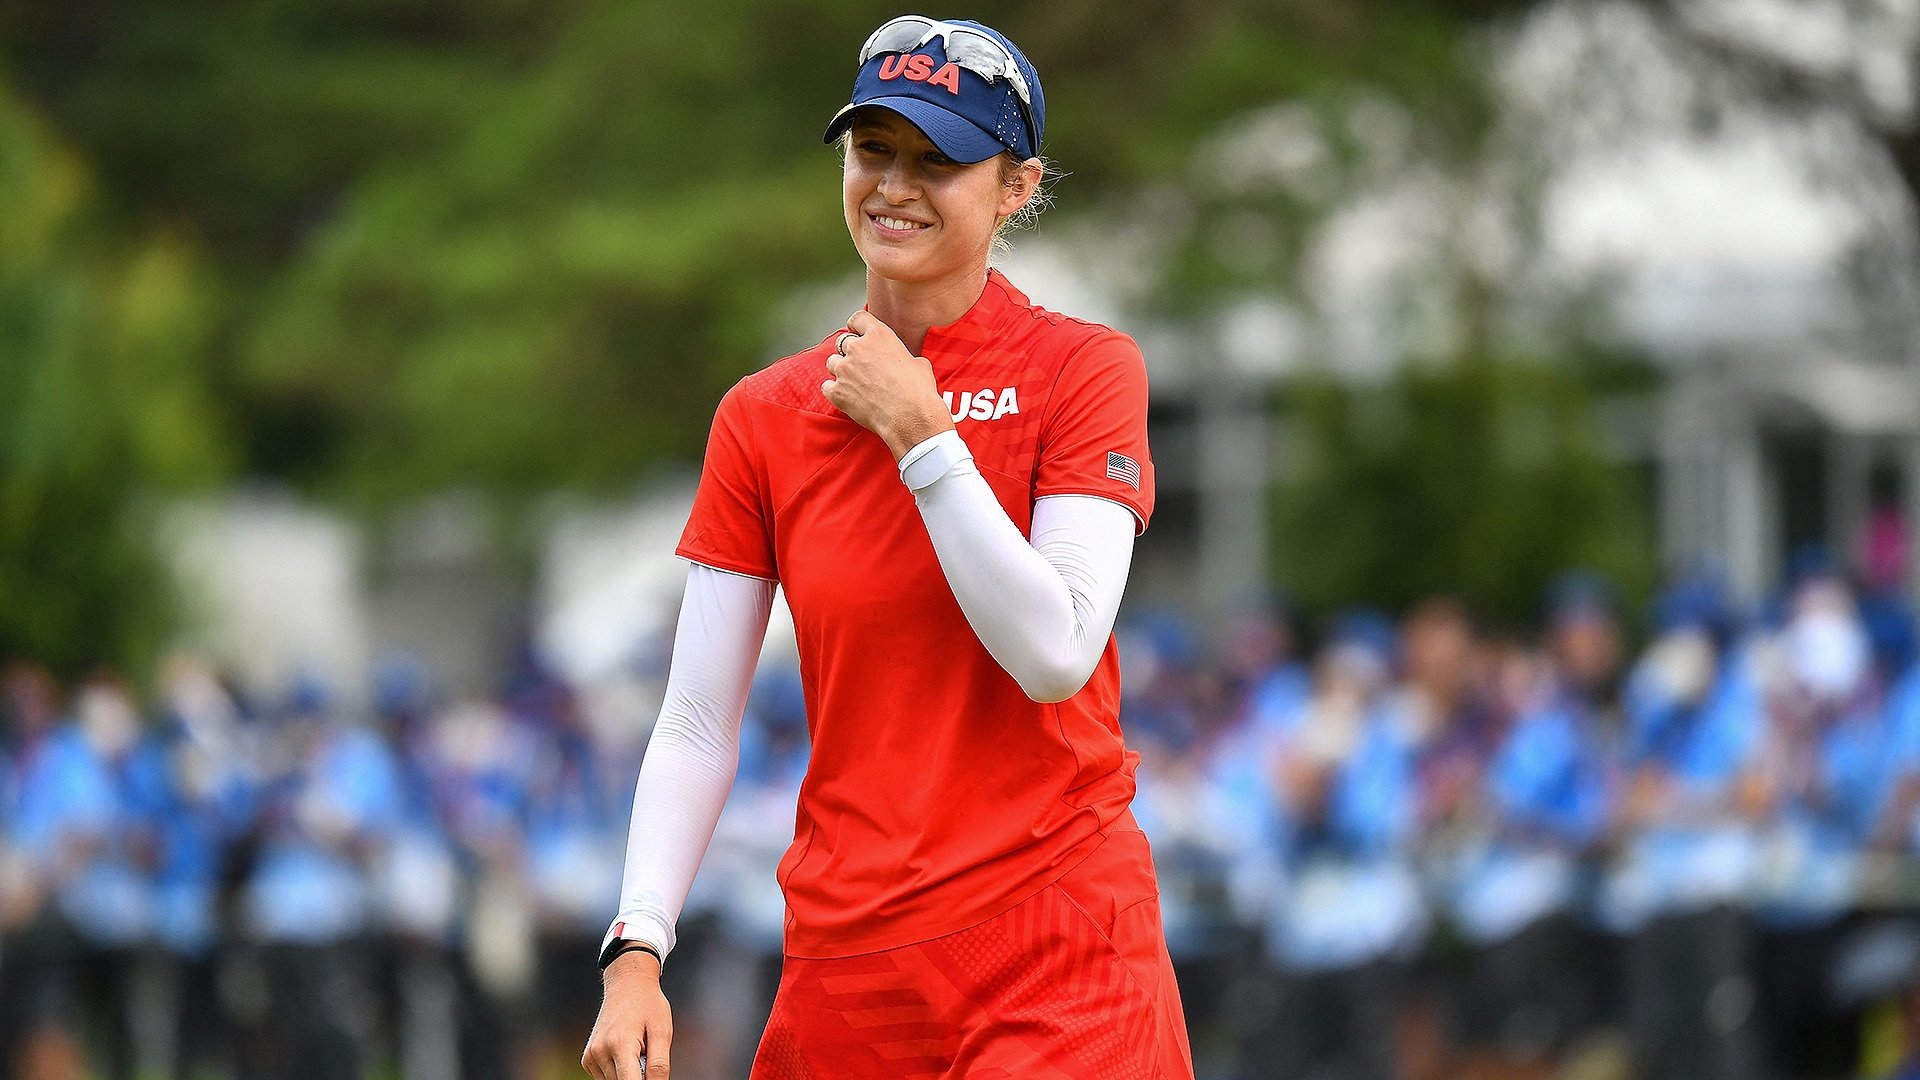 Nelly Korda's heart was racing when she won Olympics, according to Whoop device